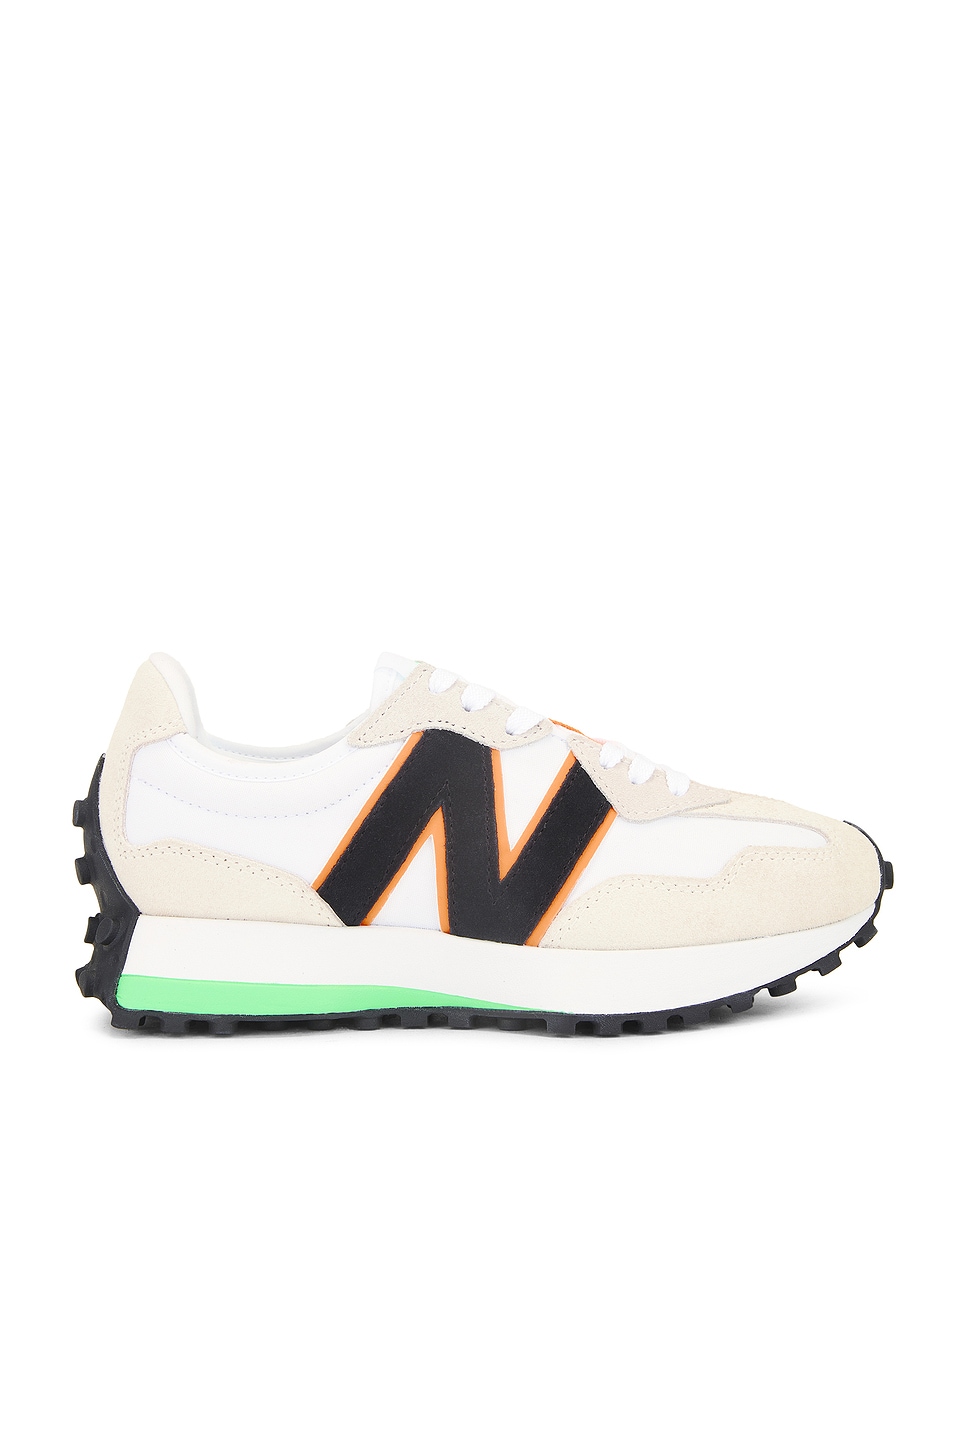 Image 1 of New Balance 327 Sneaker in Lime Leaf & Hot Mango